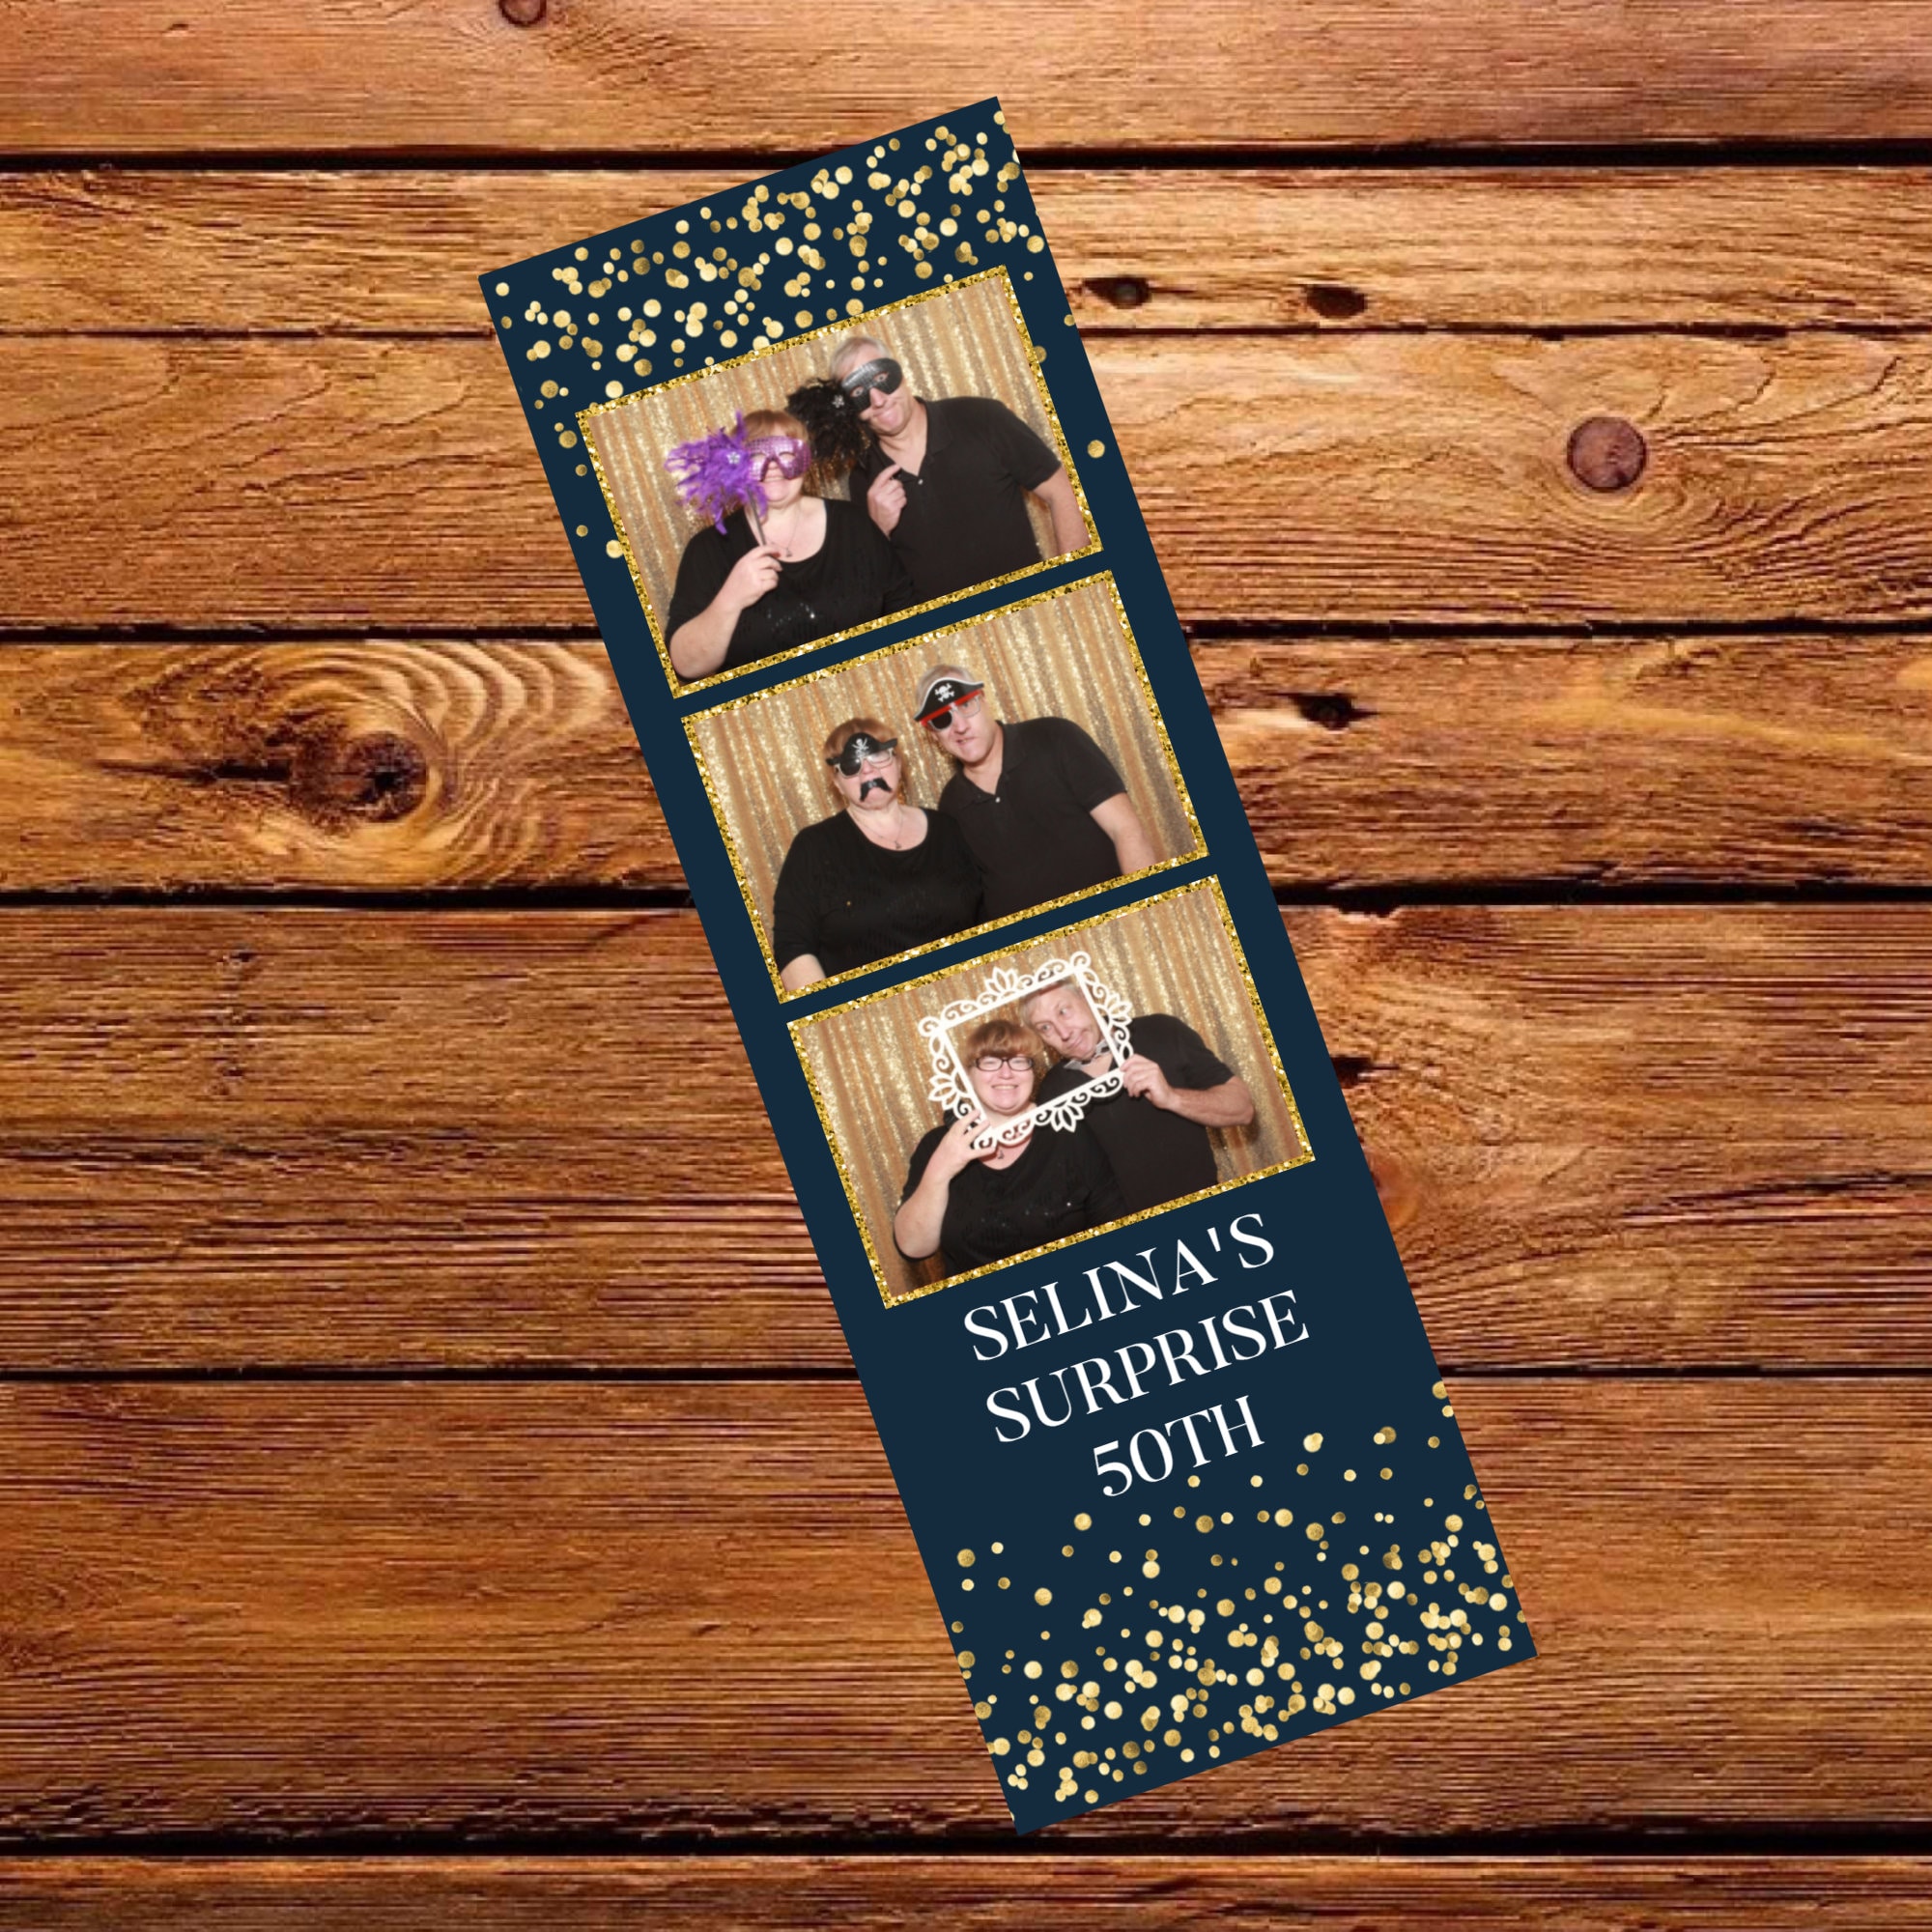 Super Ornate Gold Frames  2×6 inch Wedding & Special Event Photo Booth  Strip Template Design - ProStarra Photo Booth Designs